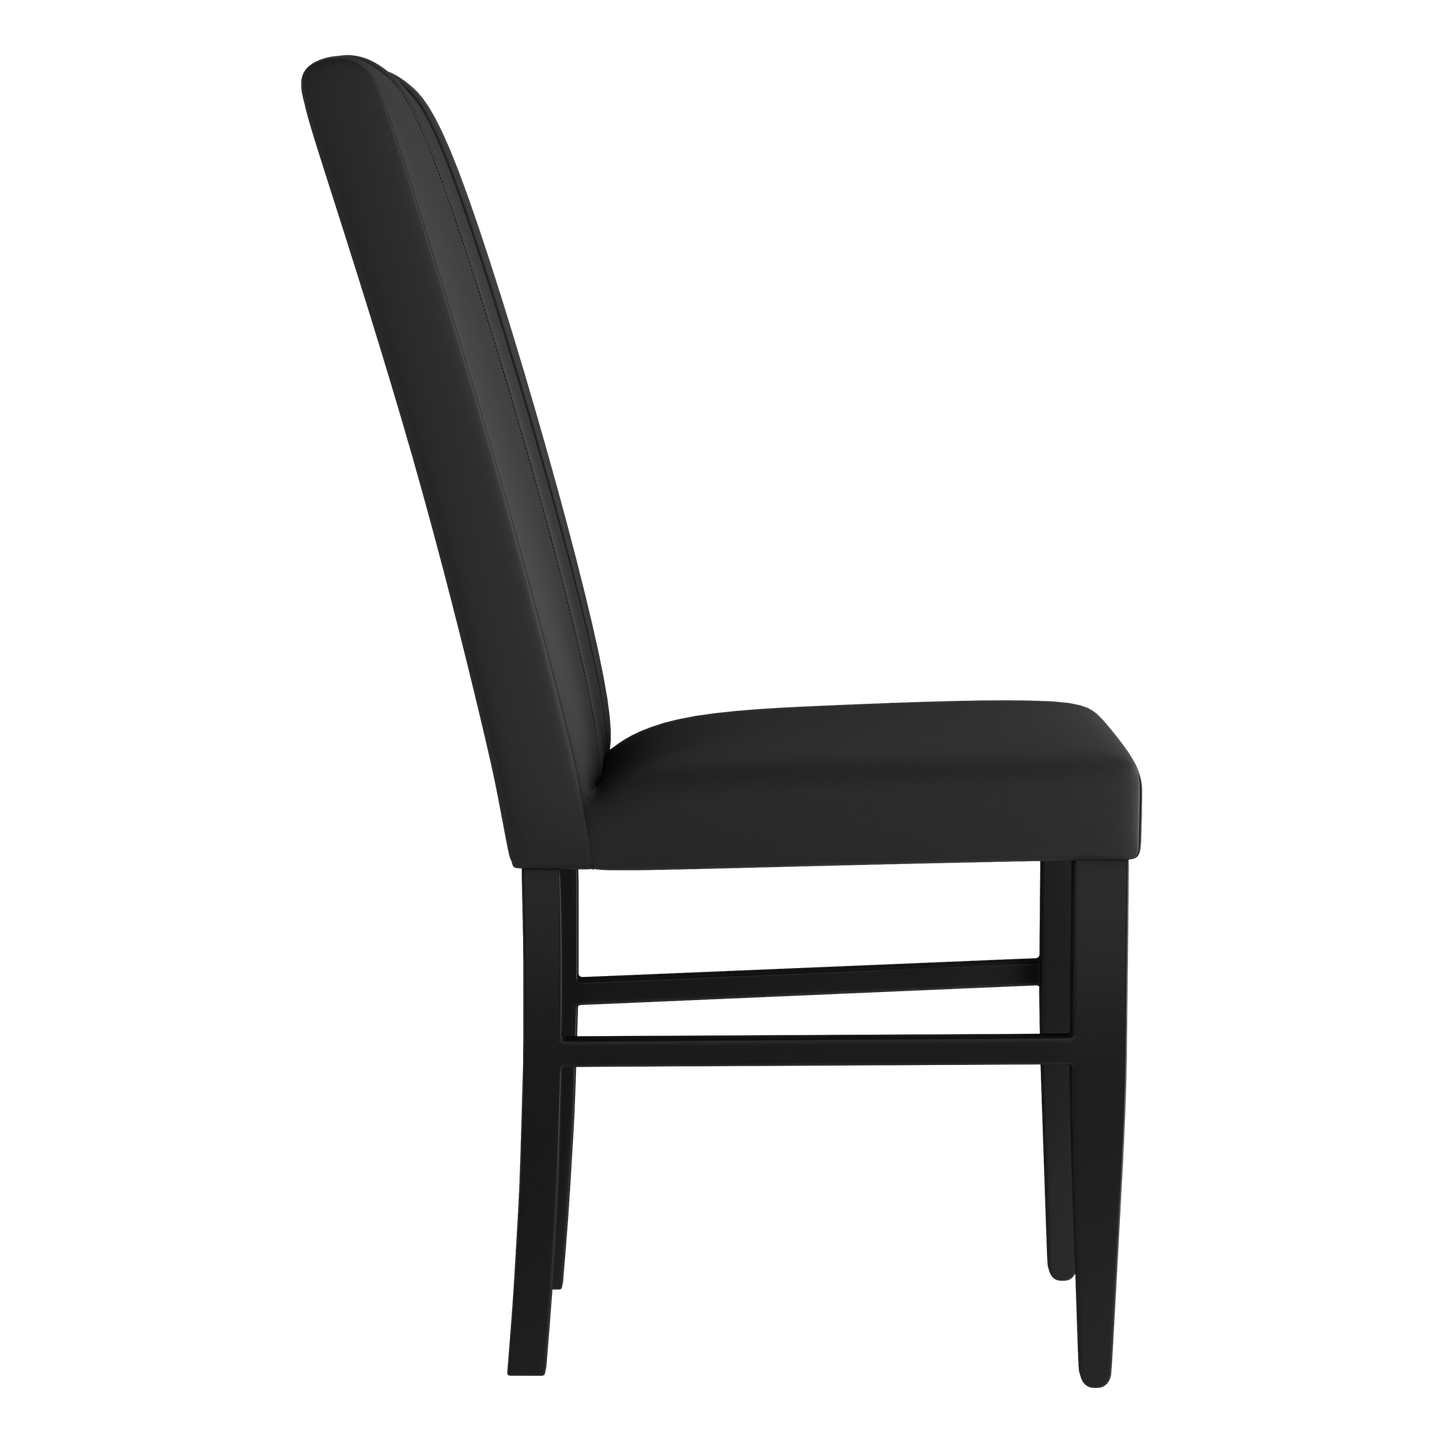 Side Chair 2000 with Boston Red Sox Logo Set of 2